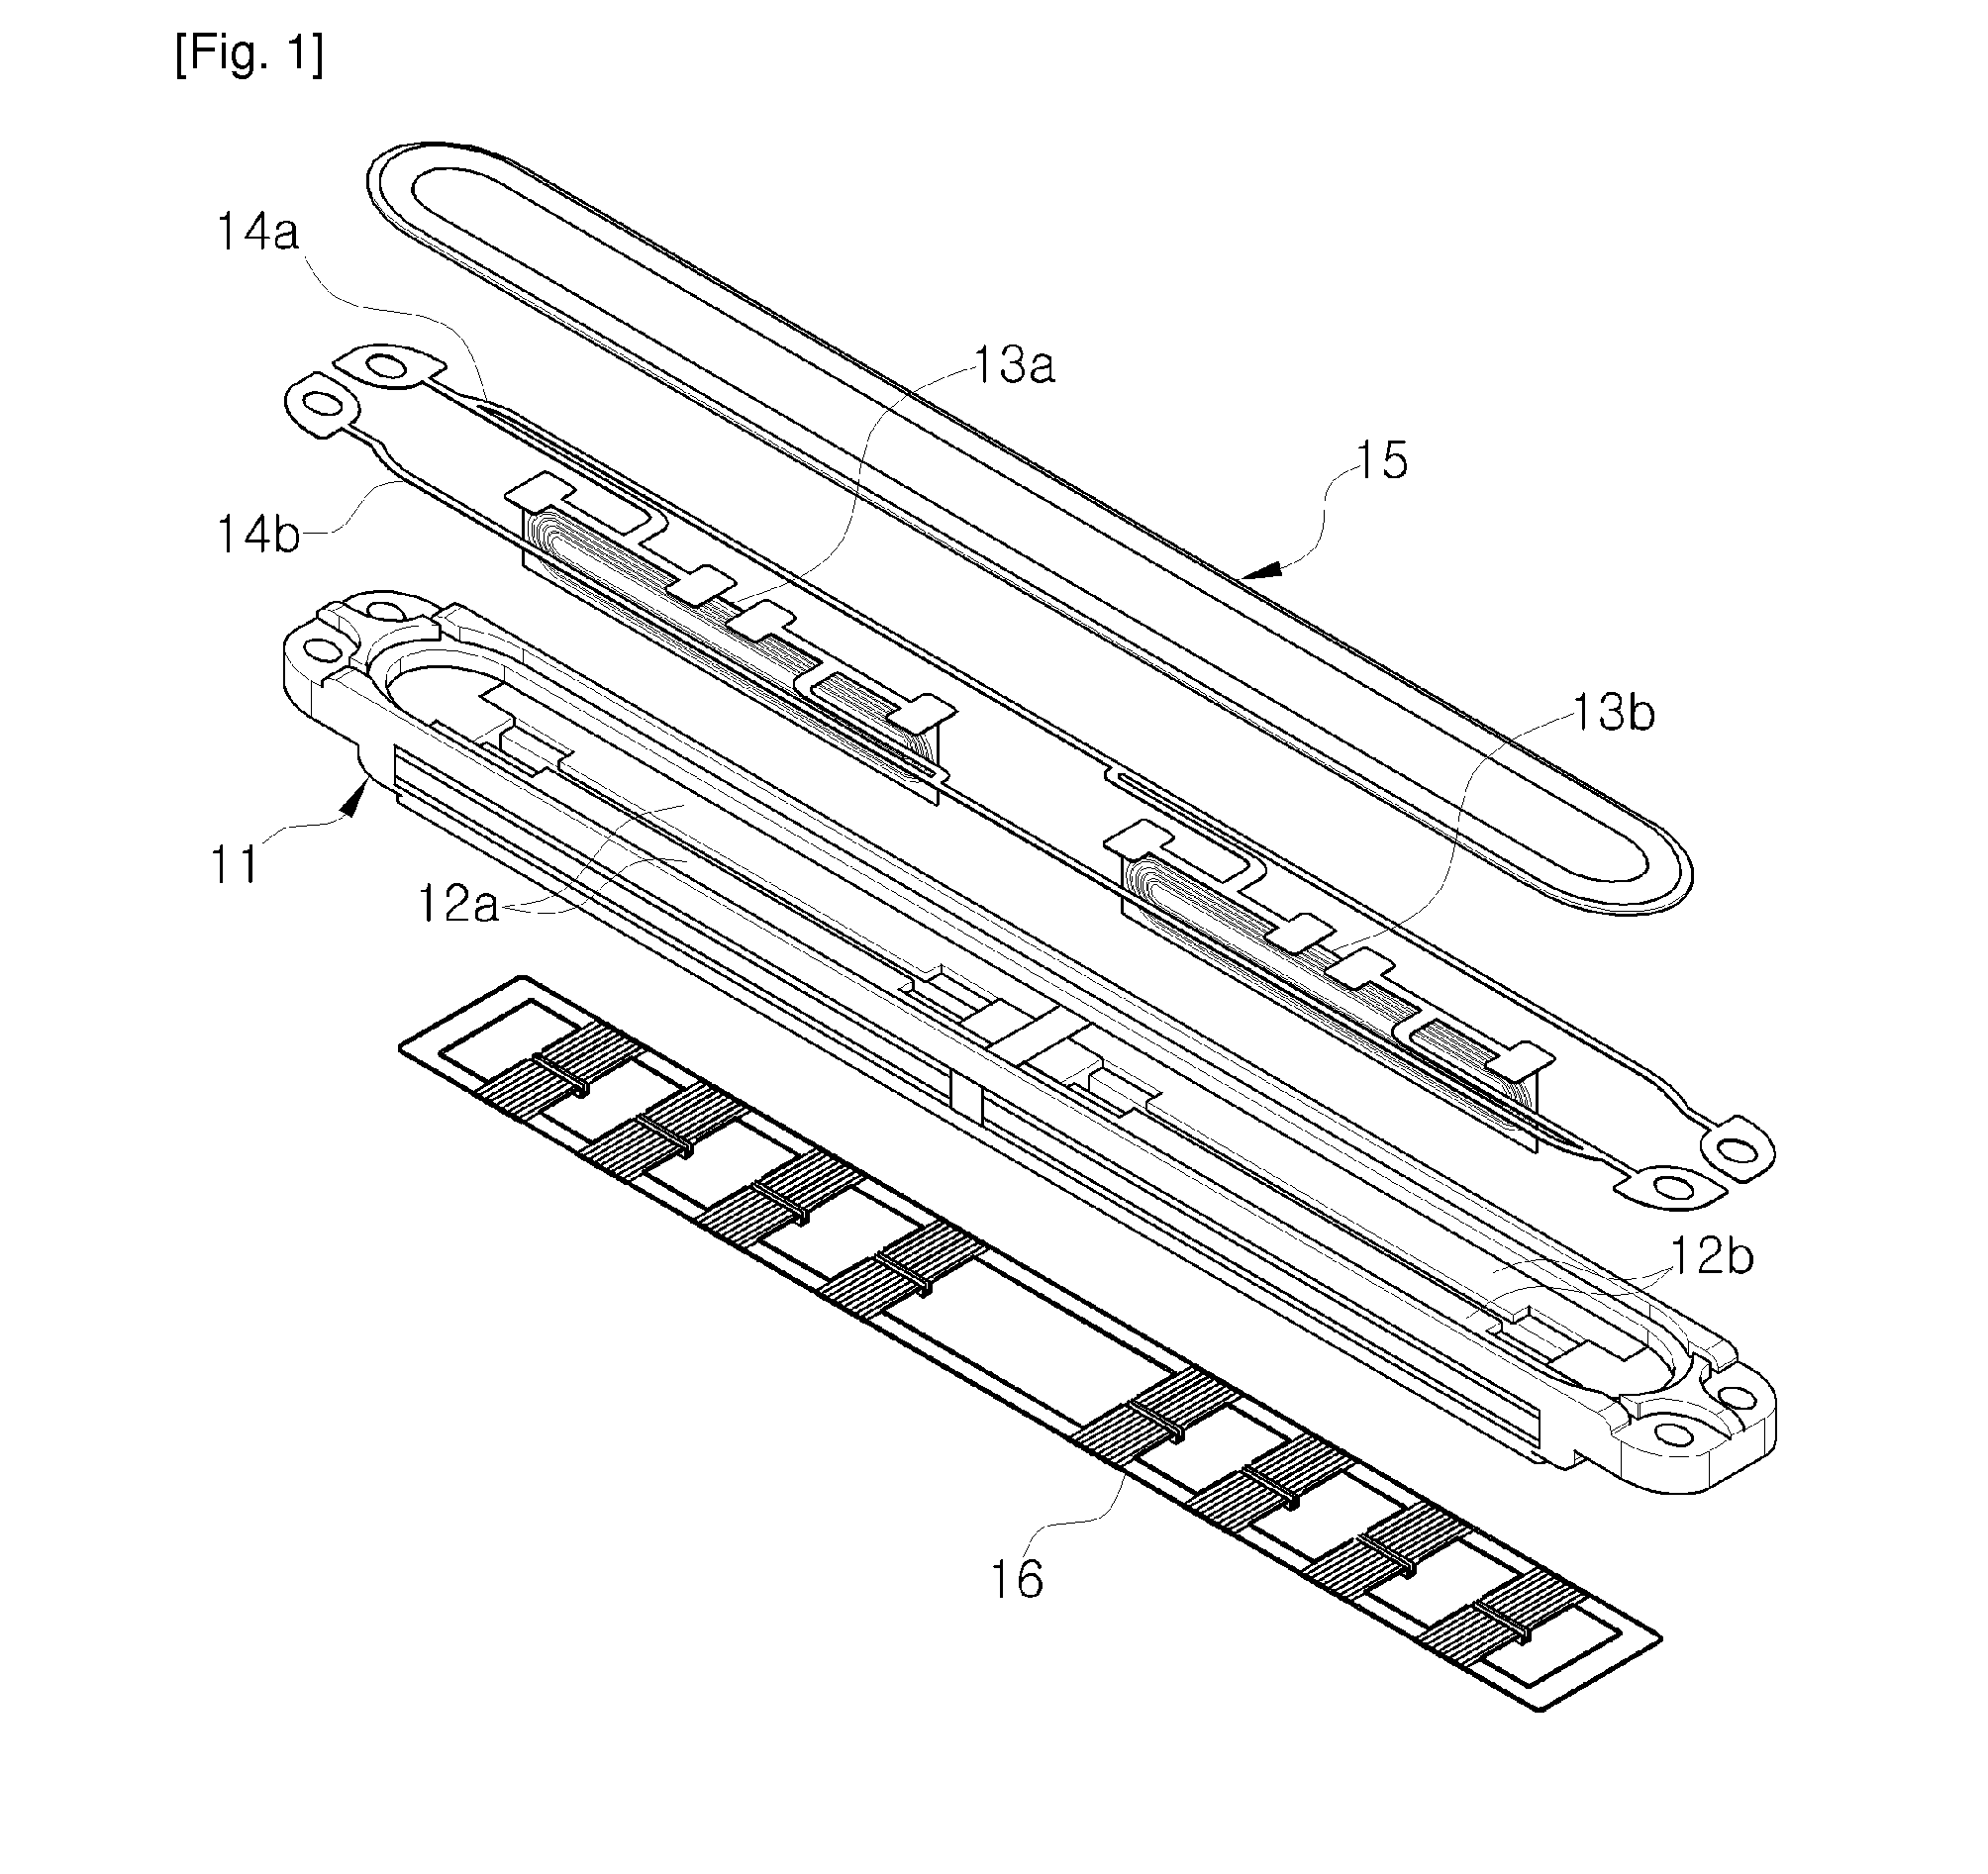 Flat-type speaker having a plurality of consecutively connected magnetic circuits